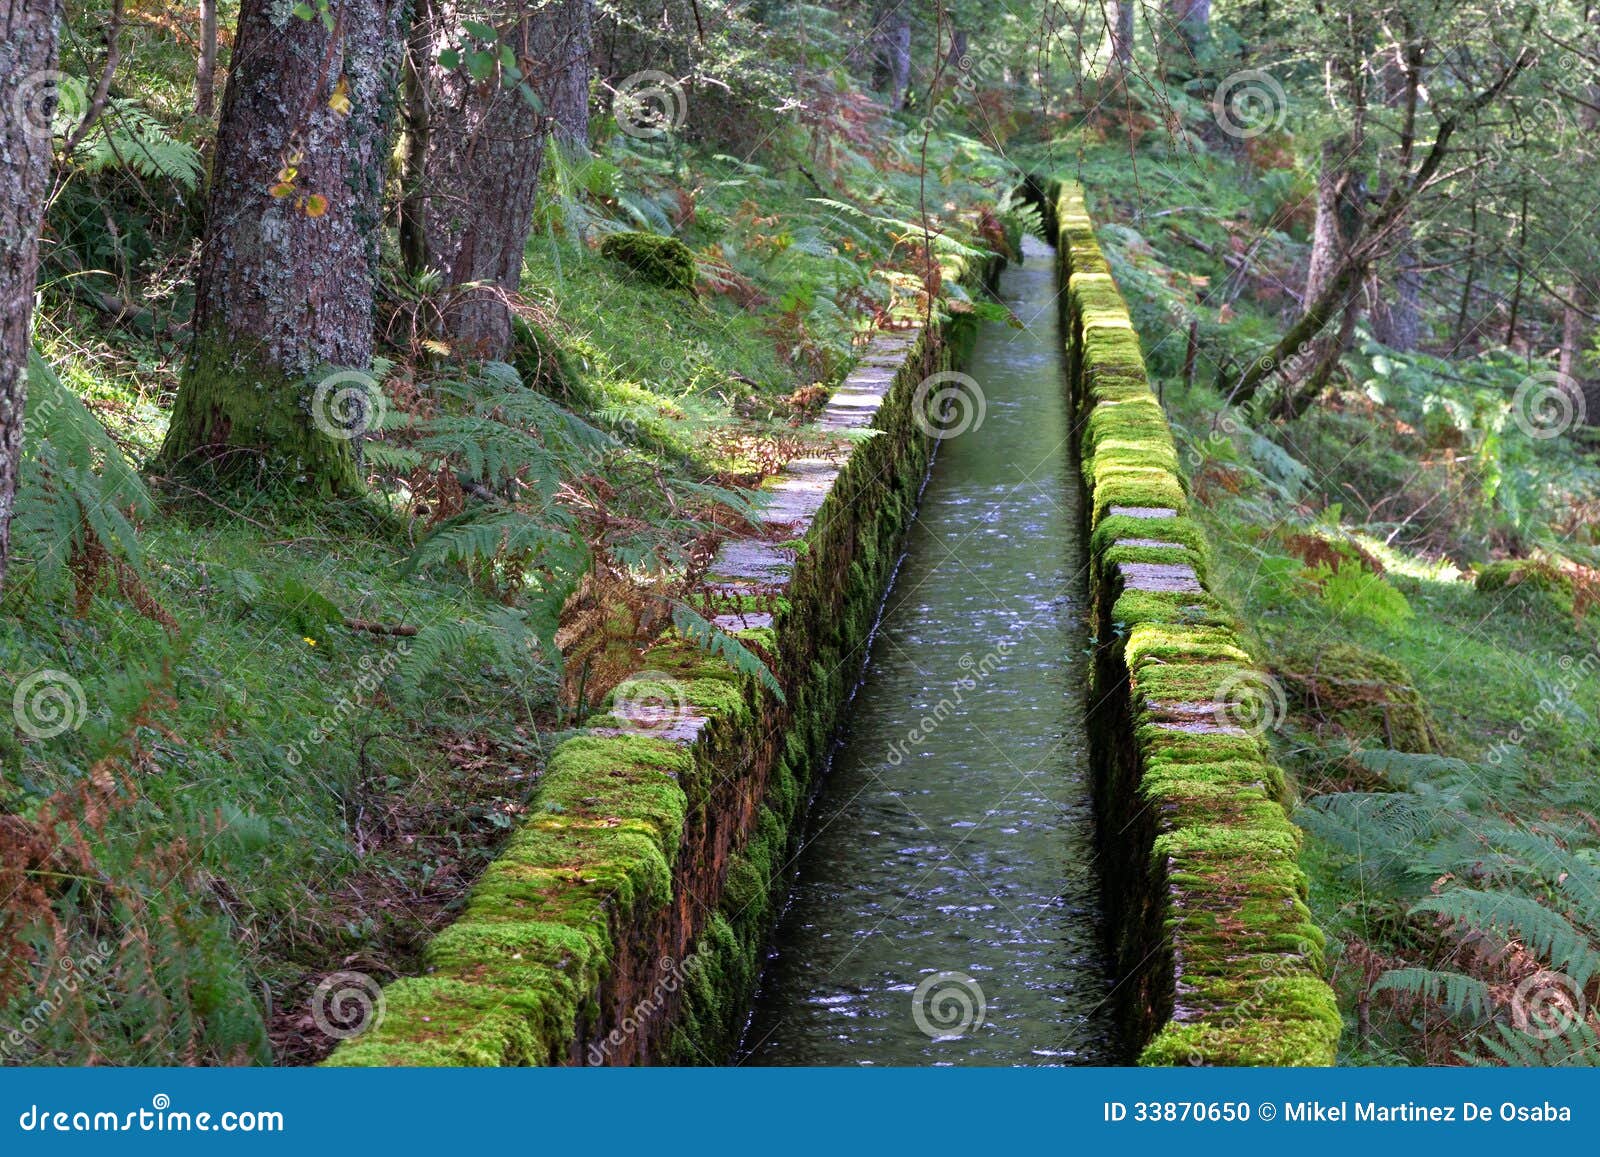 irrigation ditch for water channeling